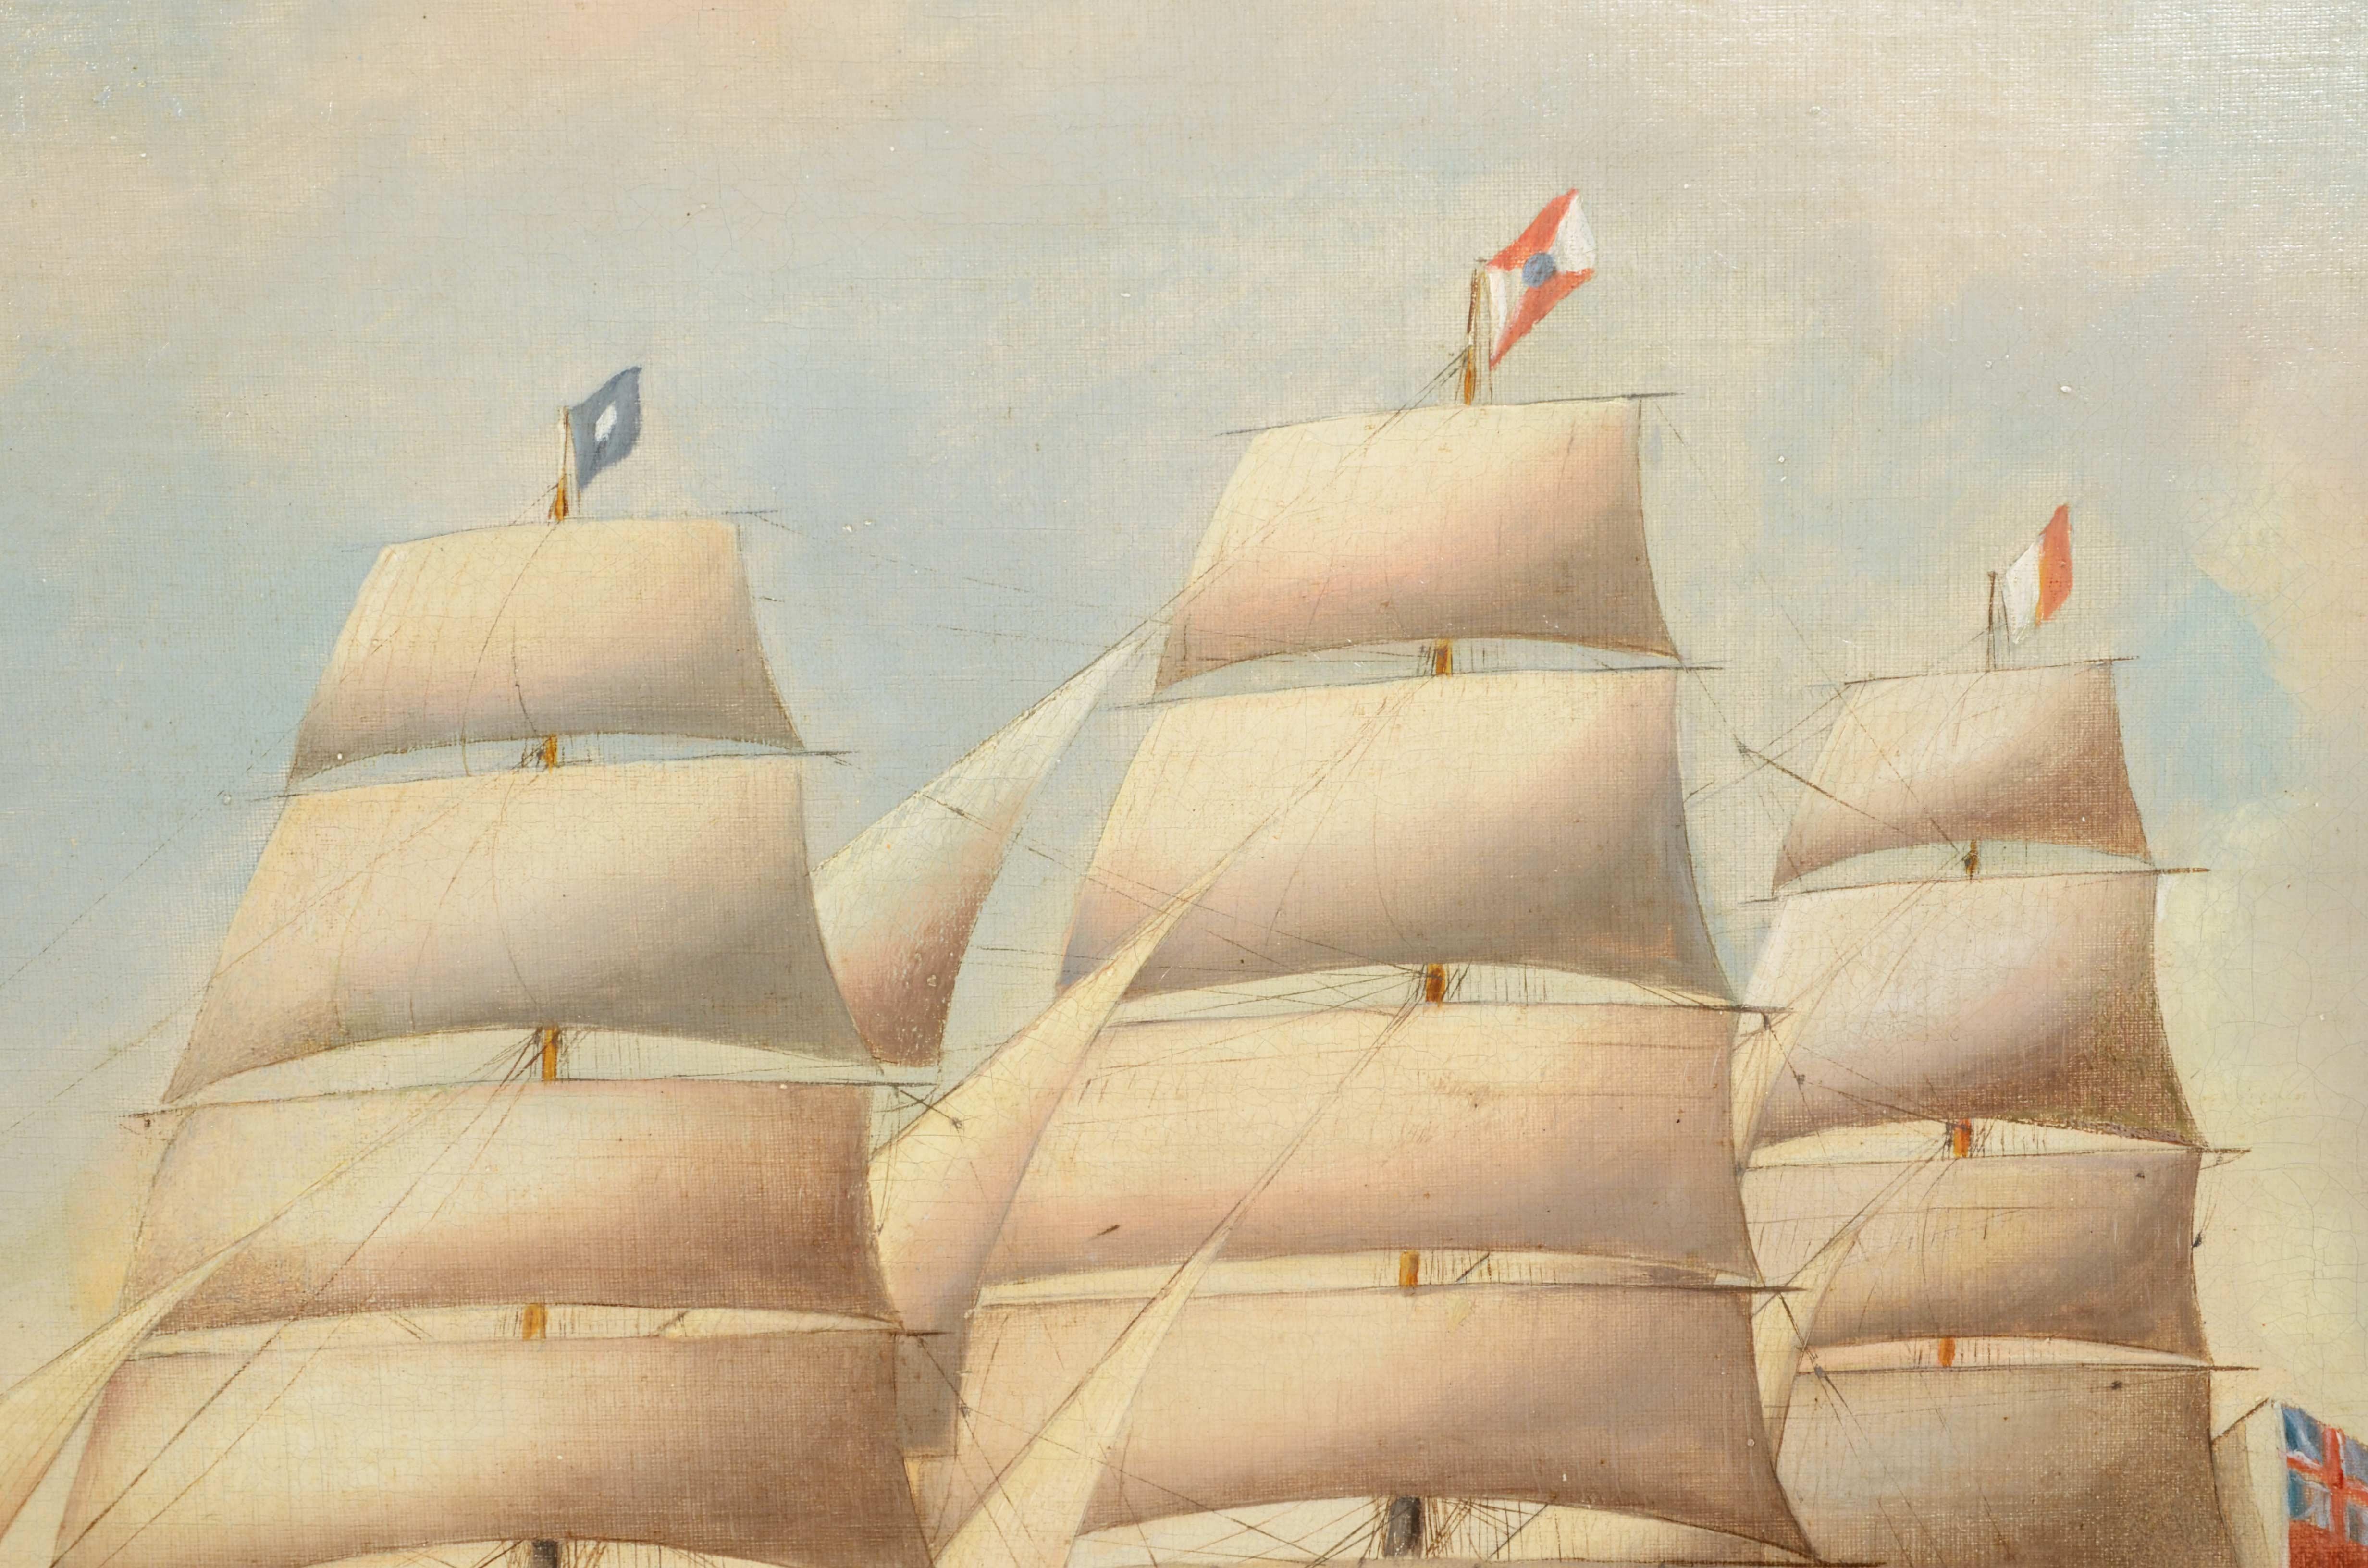 Early 19th Century Oil on canvas, antique portrait of a ship dating from the first half of the 19th century. For Sale